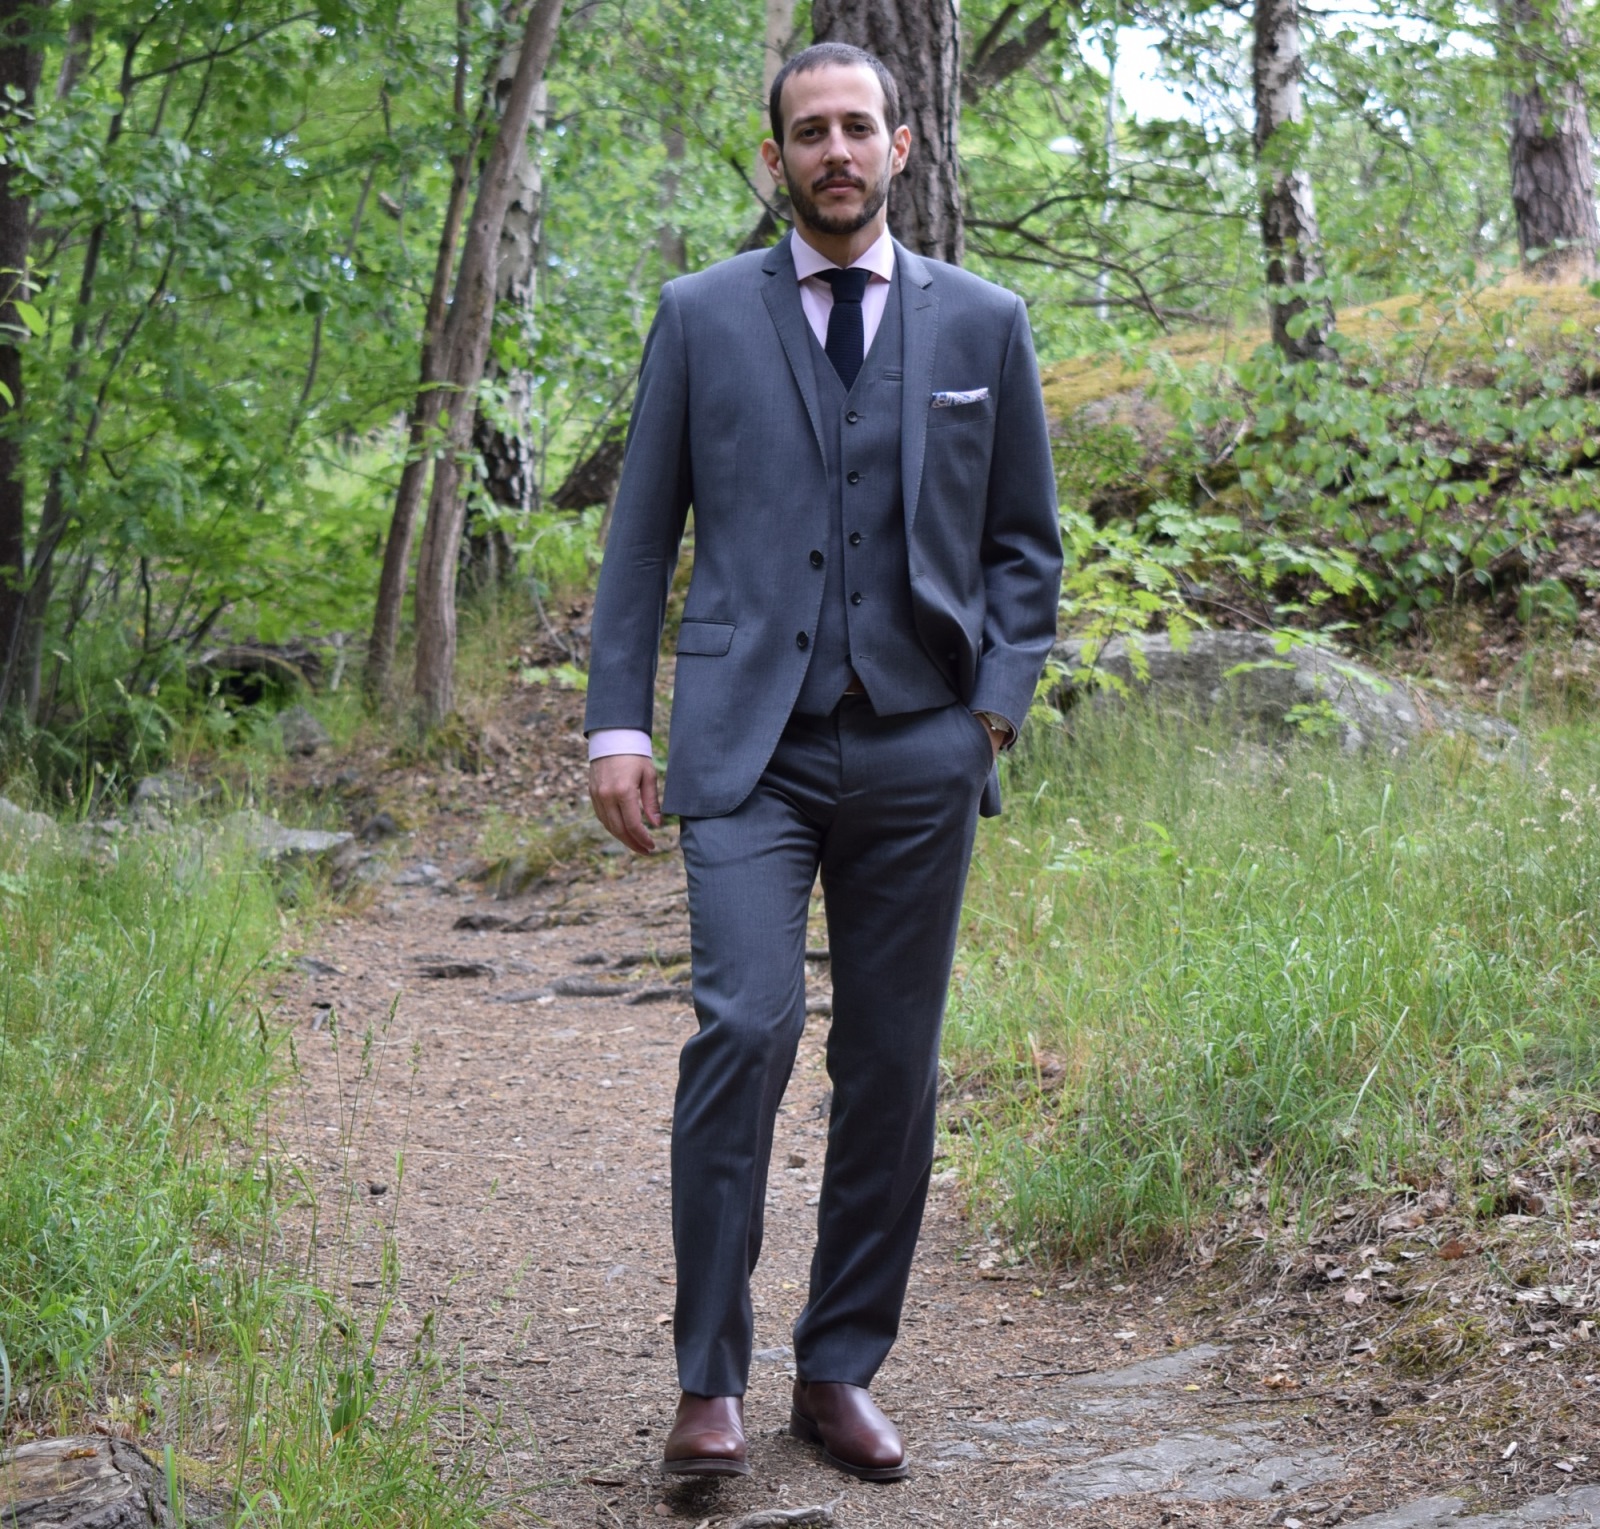 How To Wear A Grey Suit - The Three Piece Suit